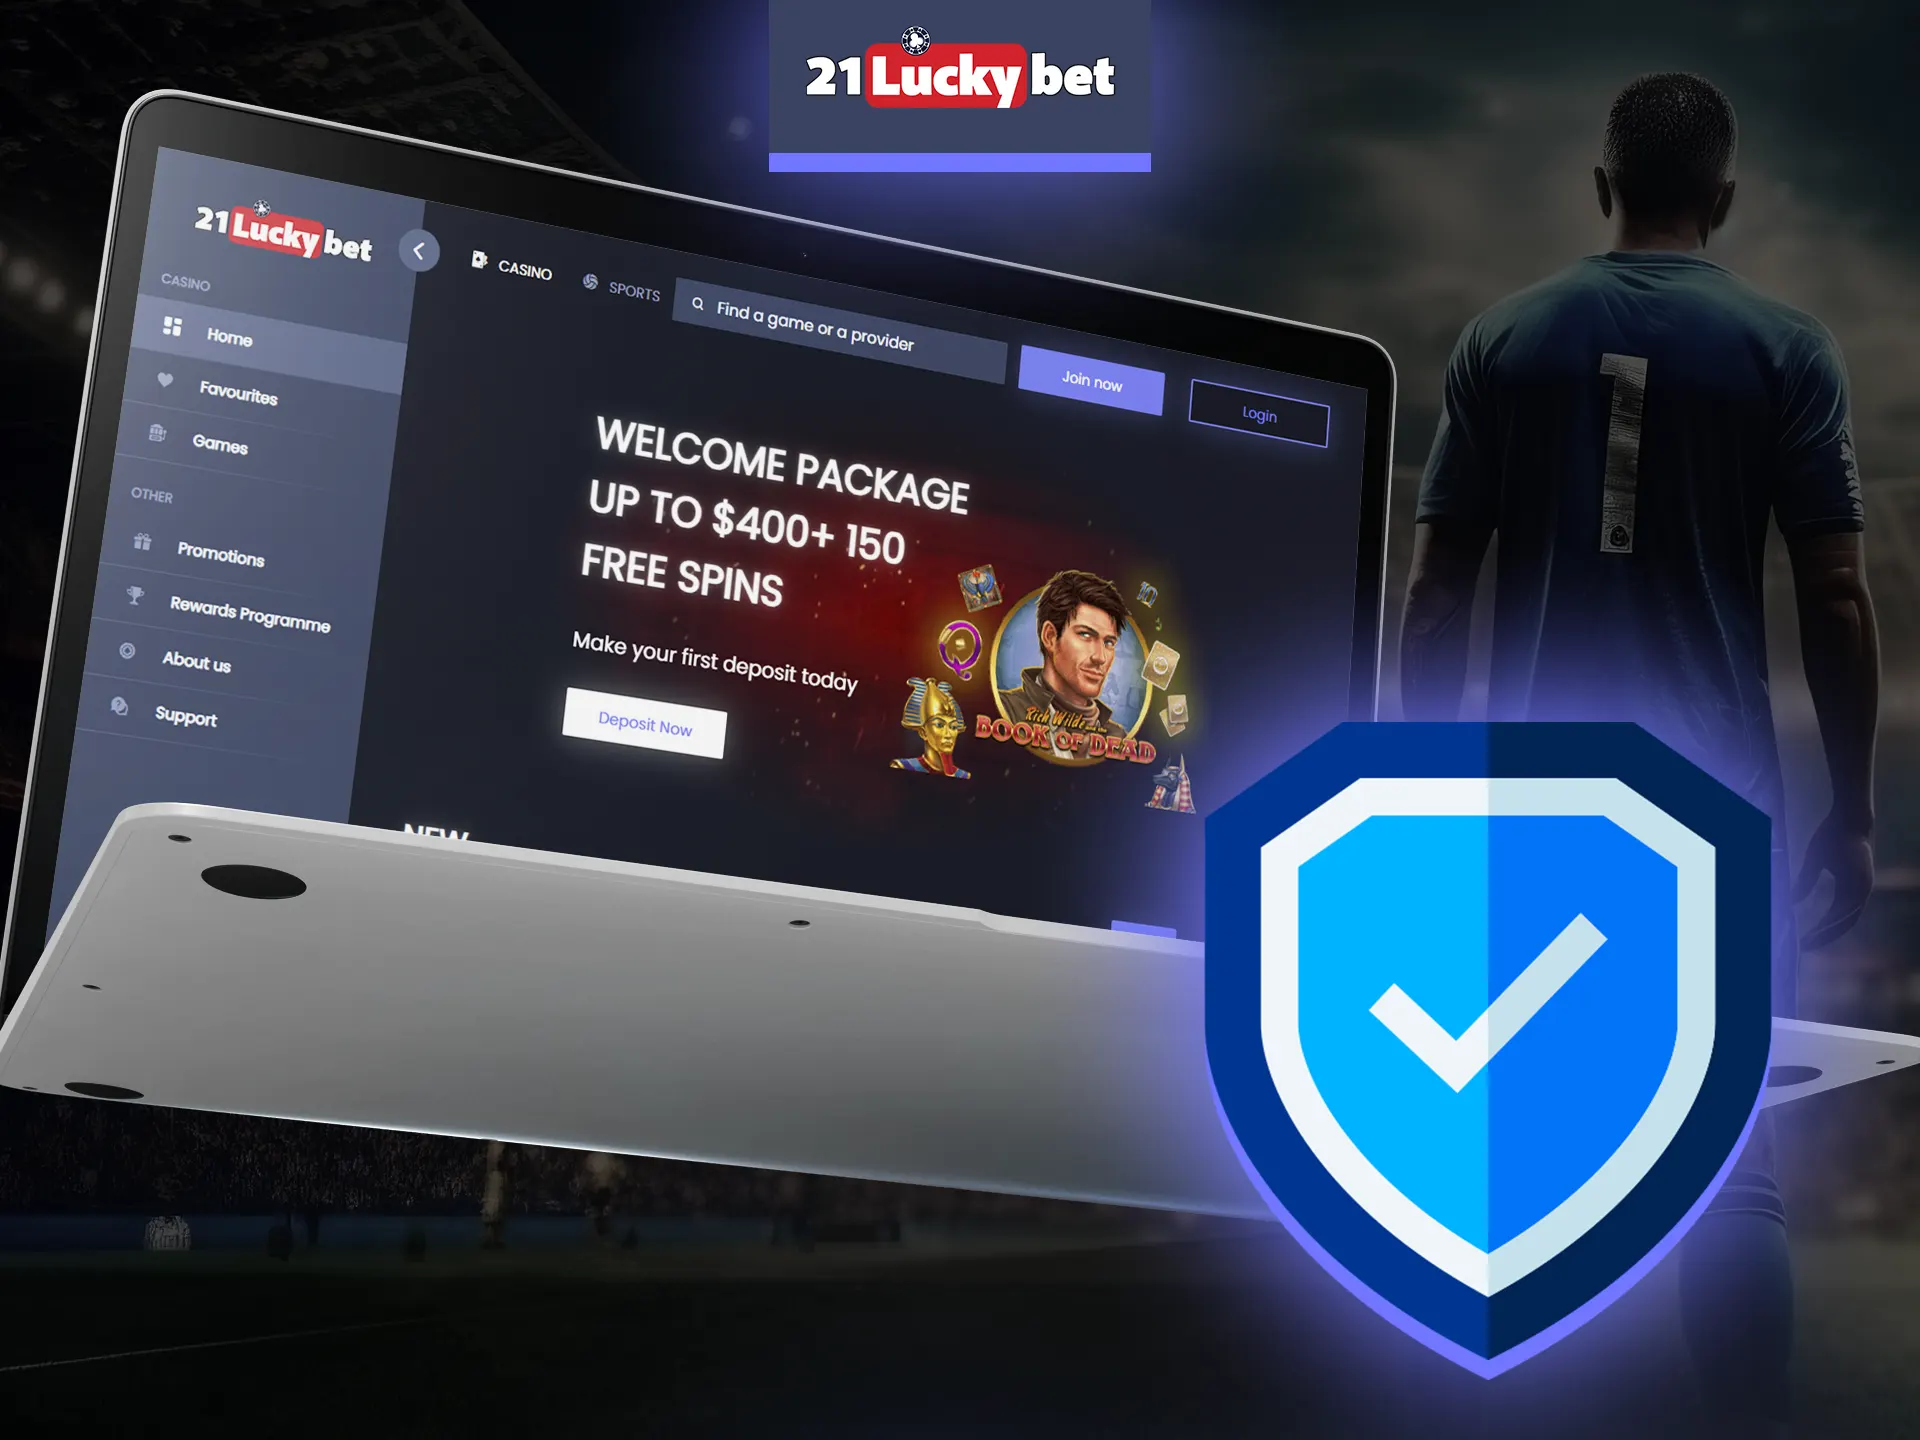 At 21luckybet you don't have to worry about the safety of your data, they are secured.